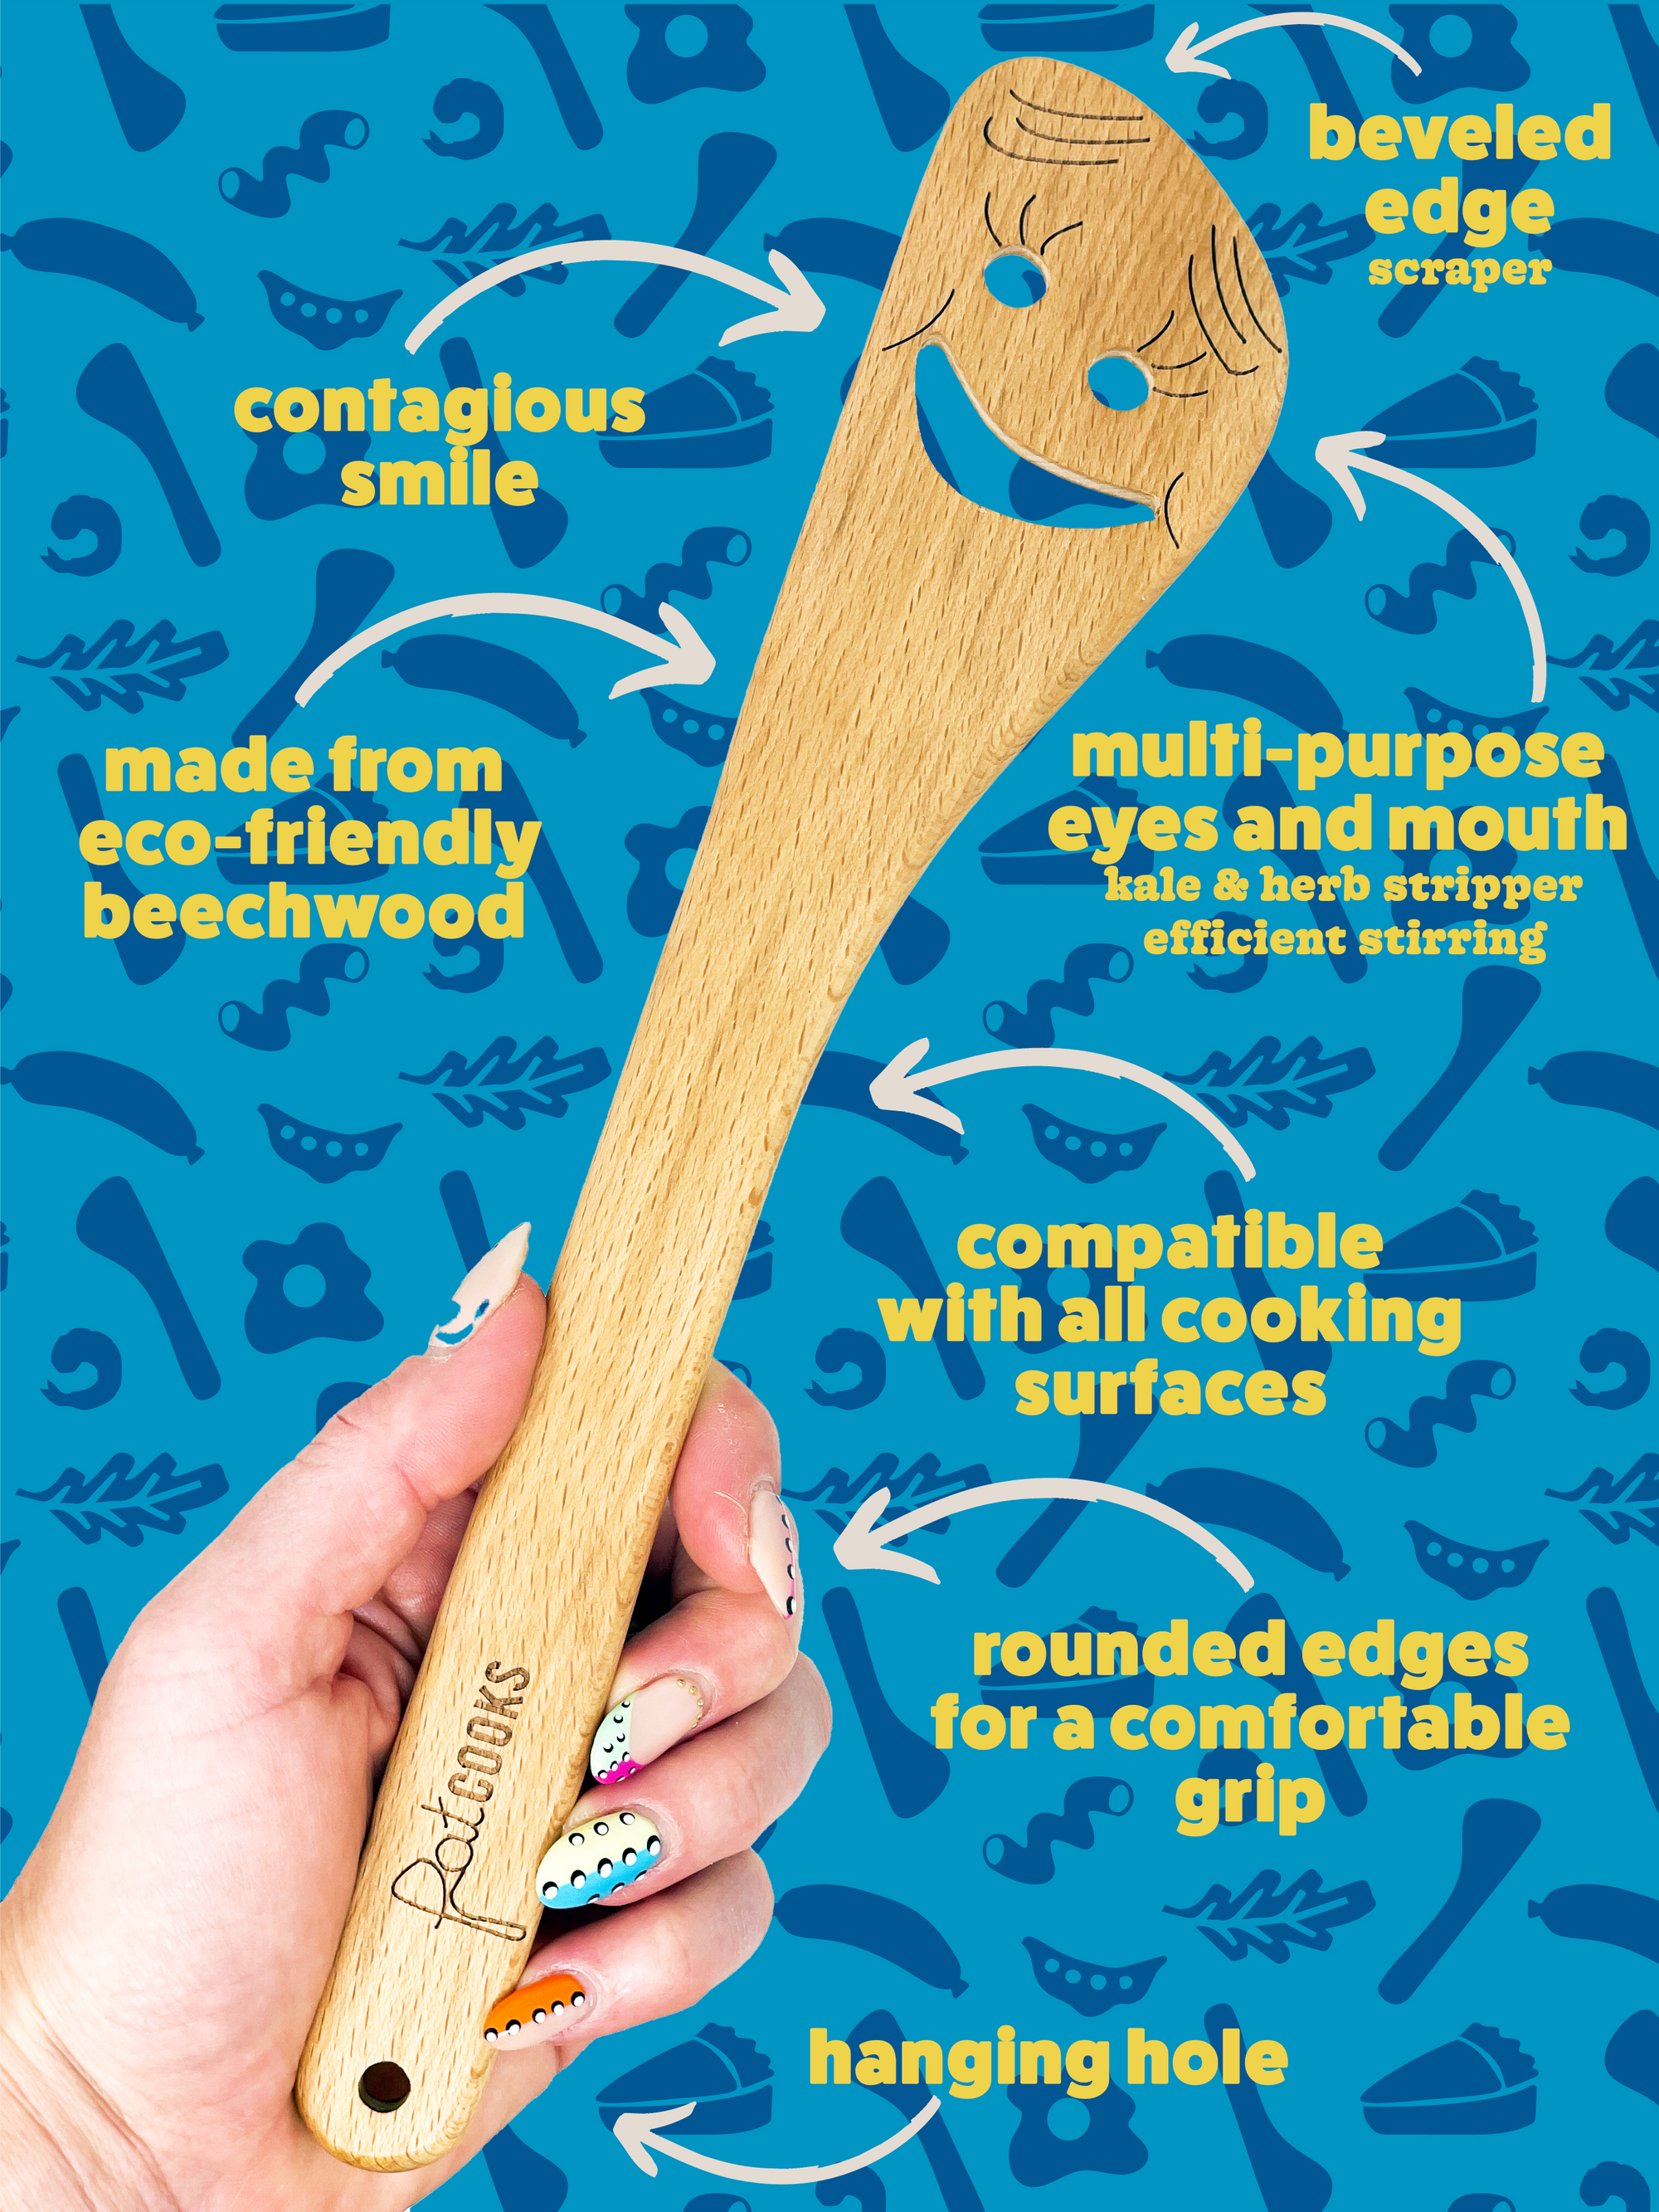 Cute Spatulas with Sayings for Baking and Gifting